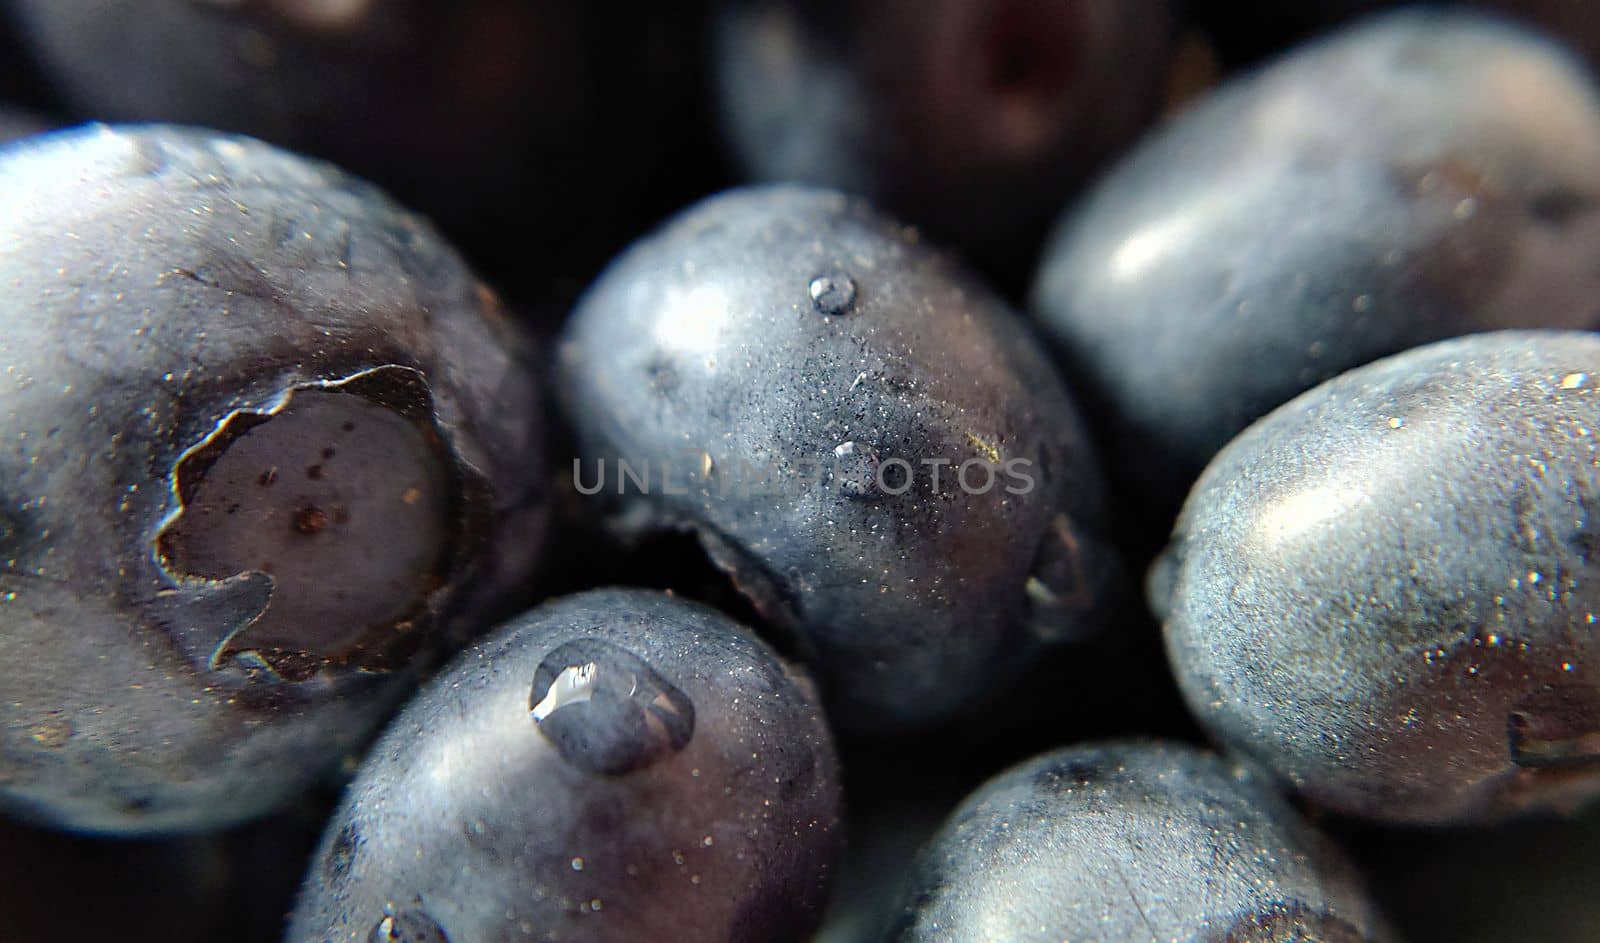 Ripe large blueberries with a drop of water close-up by Mastak80